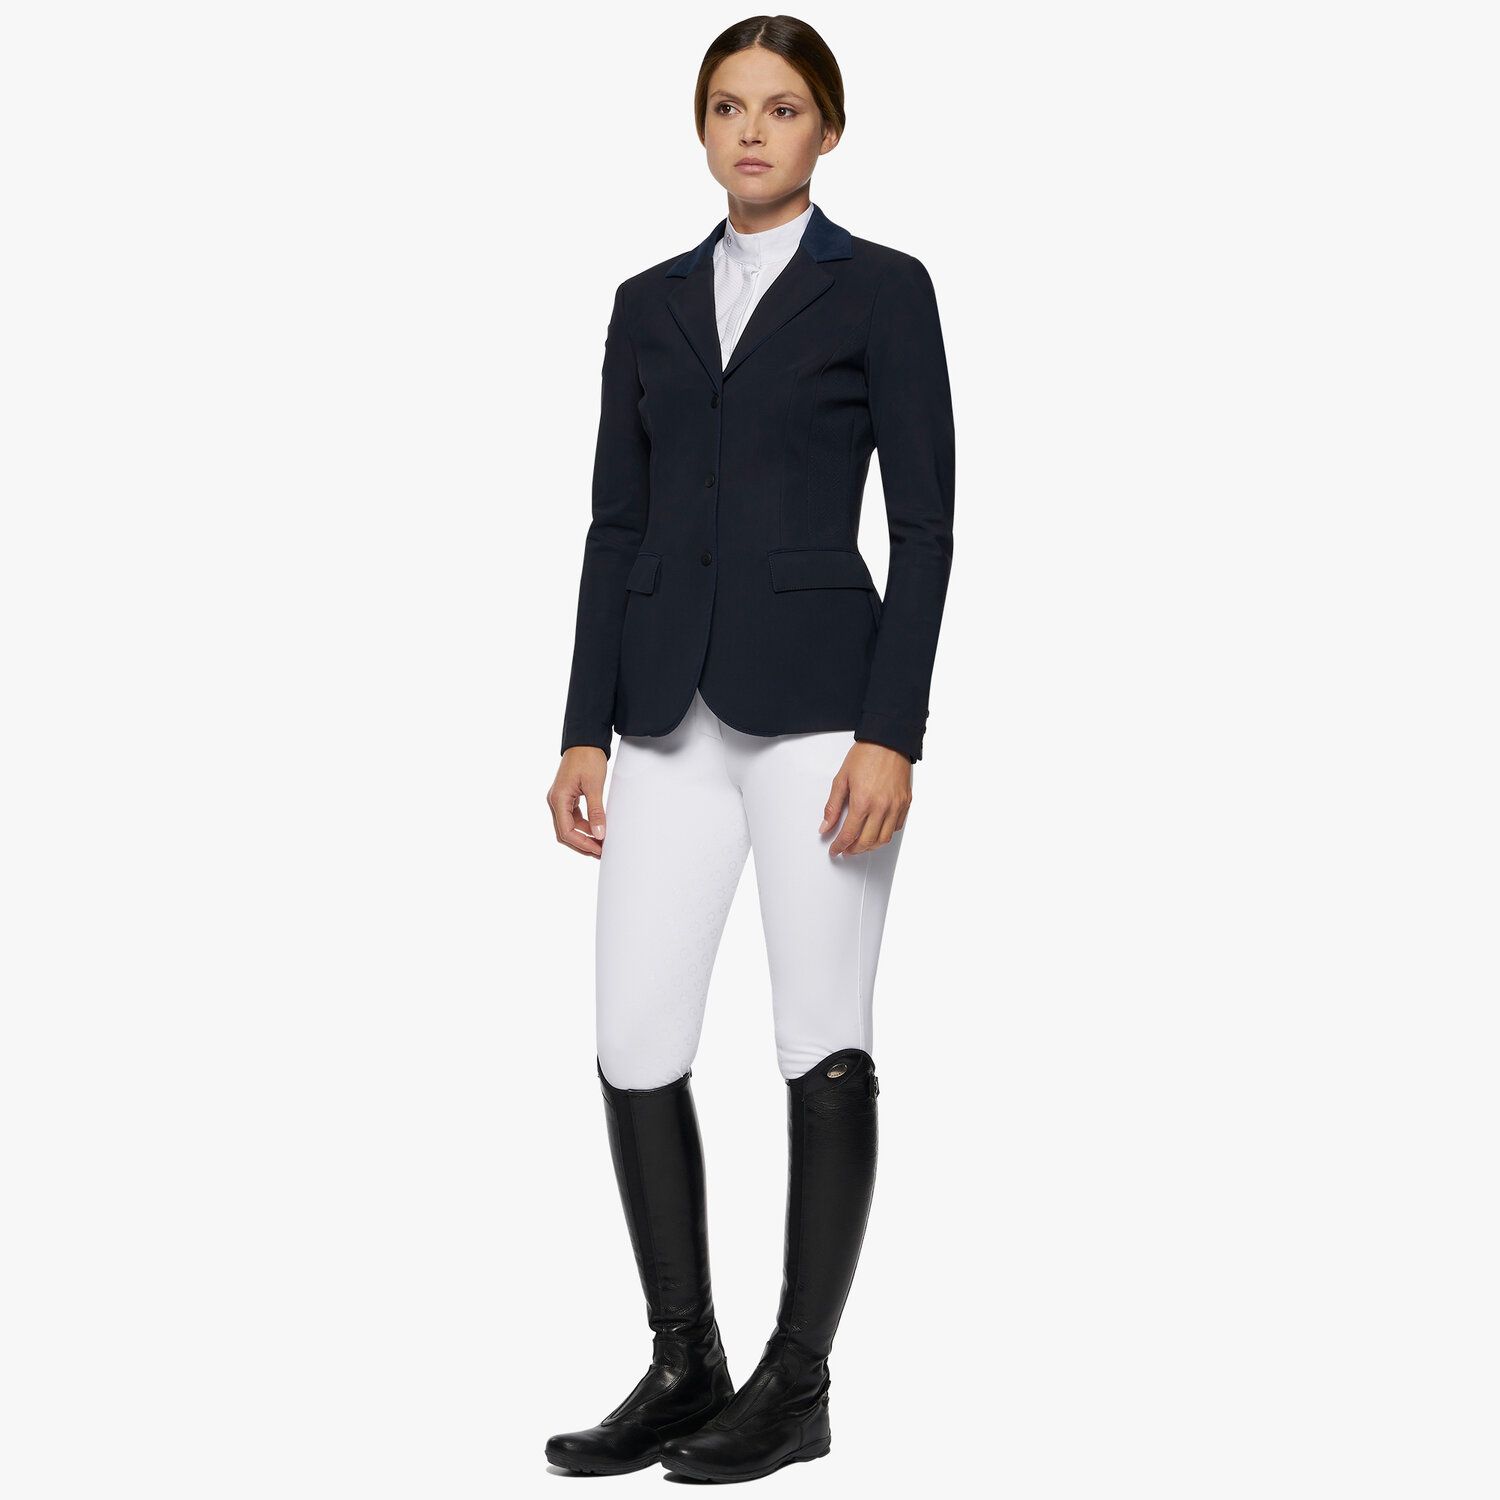 Cavalleria Toscana Women's zip riding jacket with perforated inserts. NAVY-4